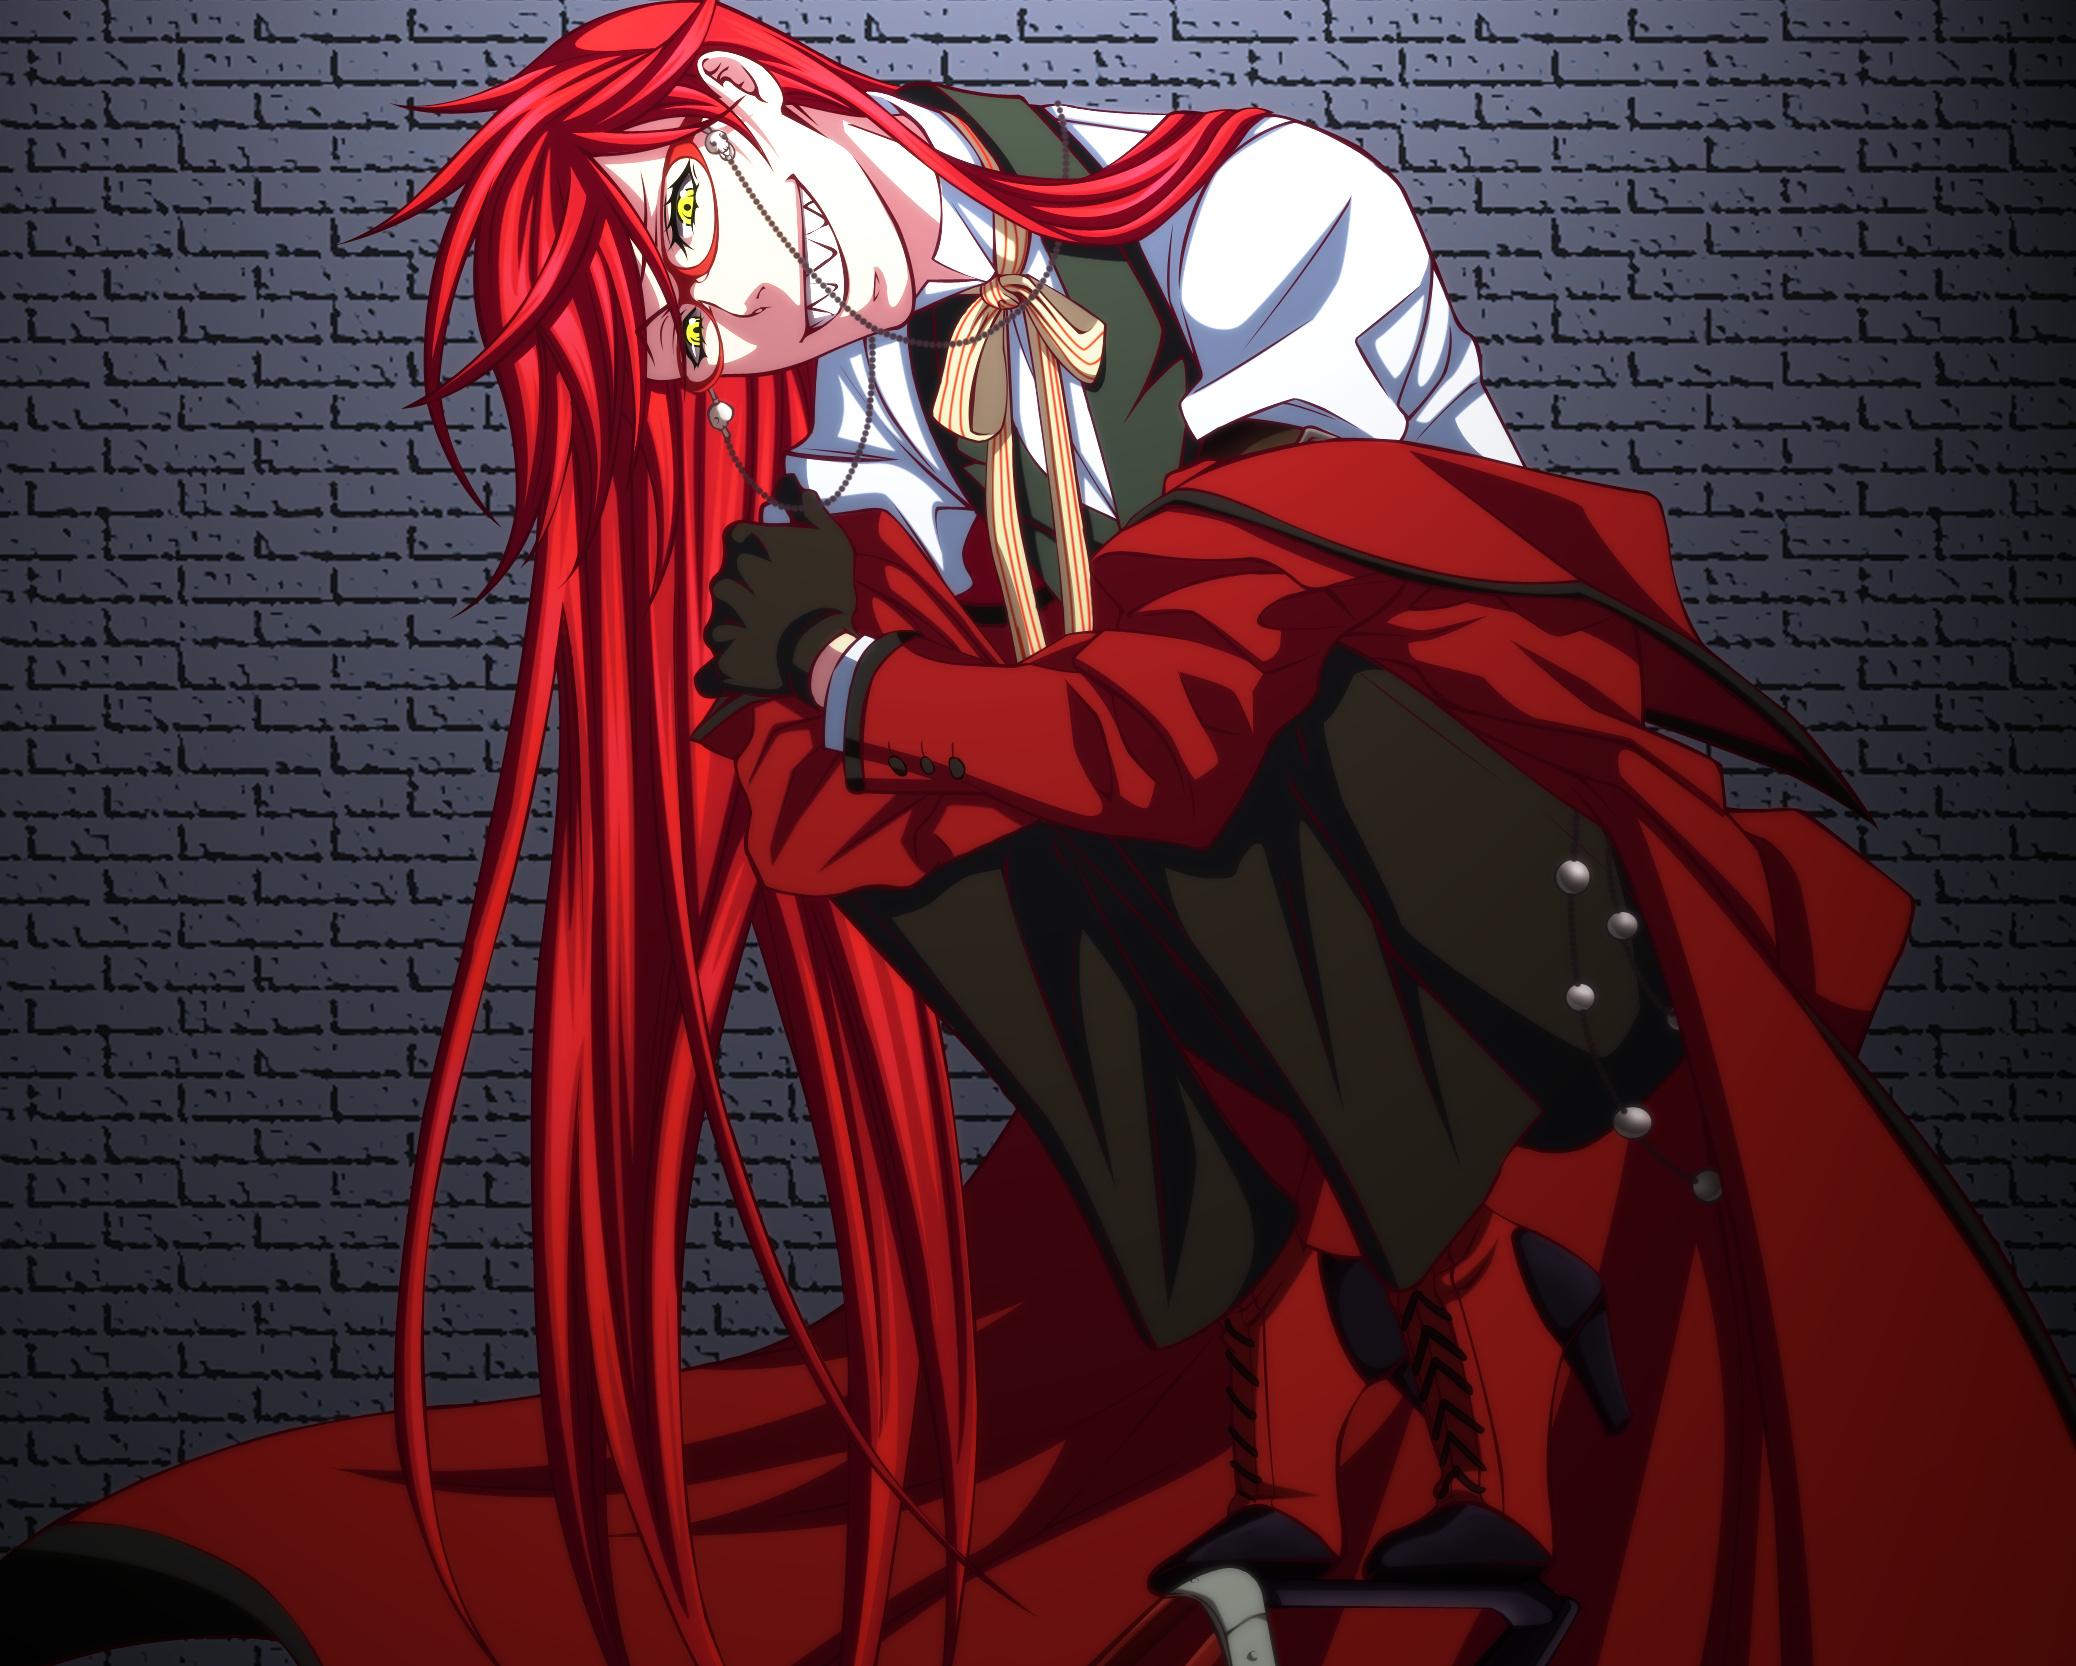 Grell Sutcliff: A popular character among fans of the "Black Butler" series. 2080x1670 HD Wallpaper.